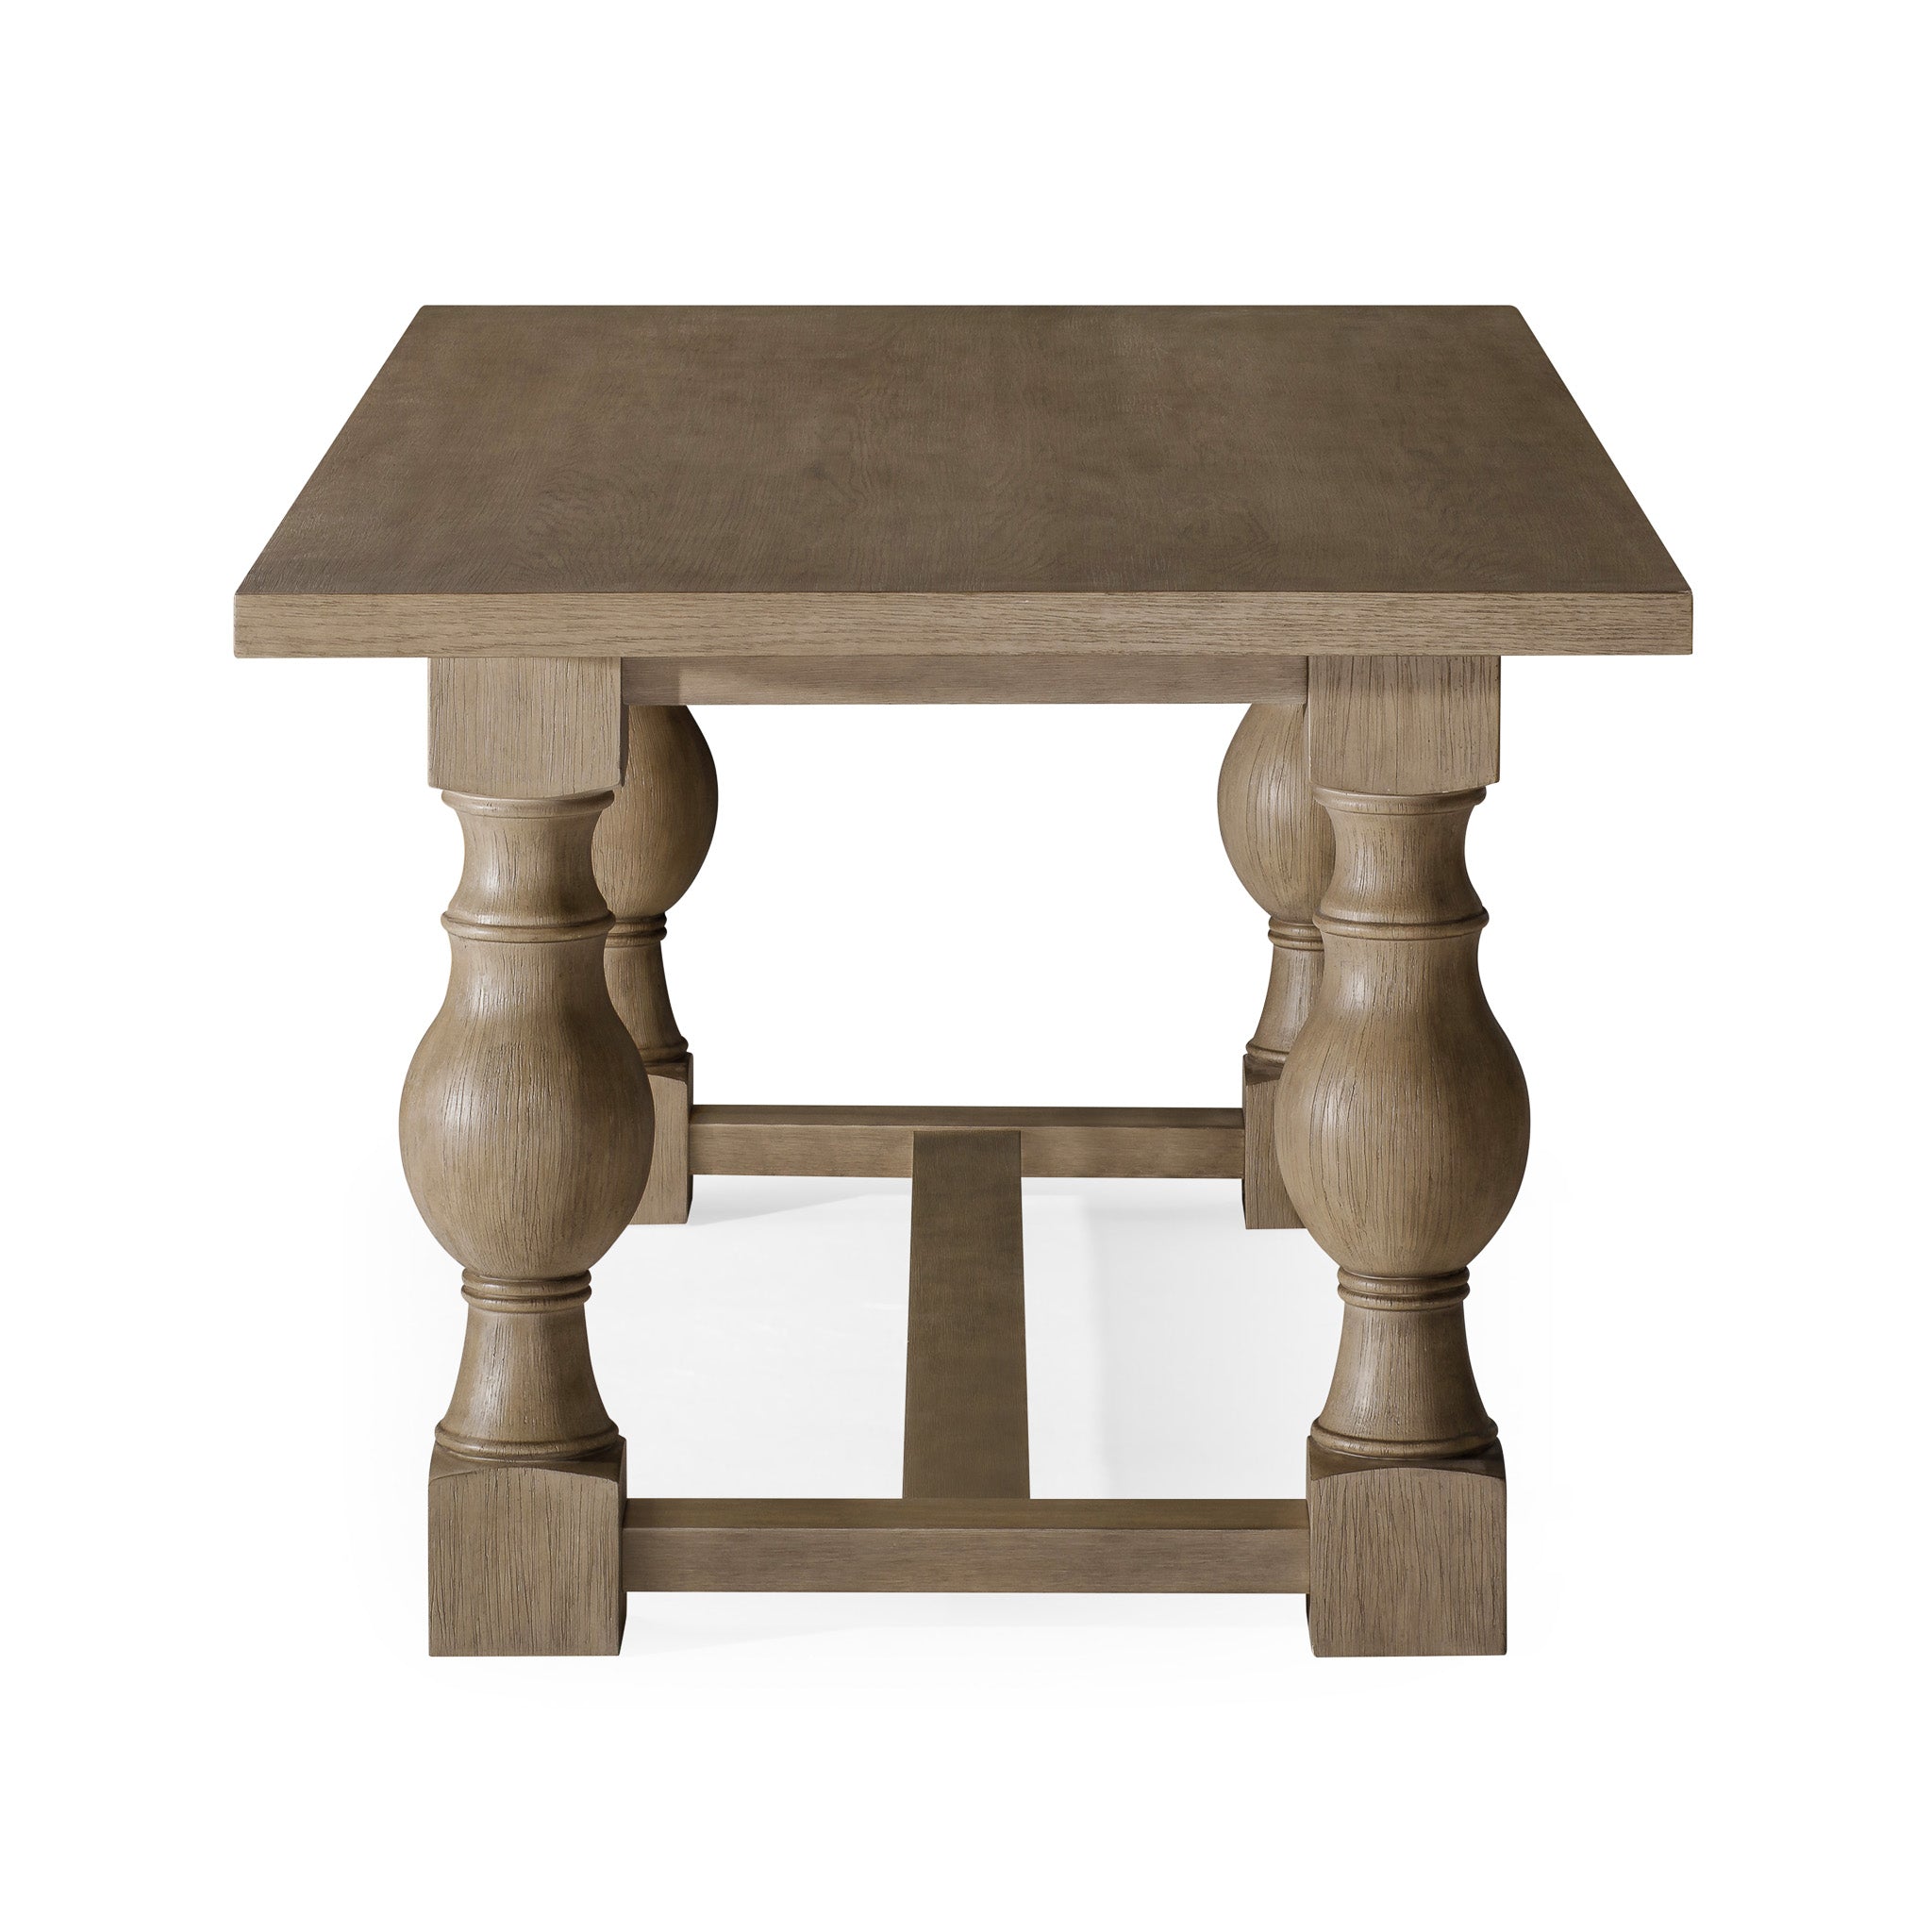 Leon Classical Wooden Dining Table in Antiqued Grey Finish in Dining Furniture by Maven Lane